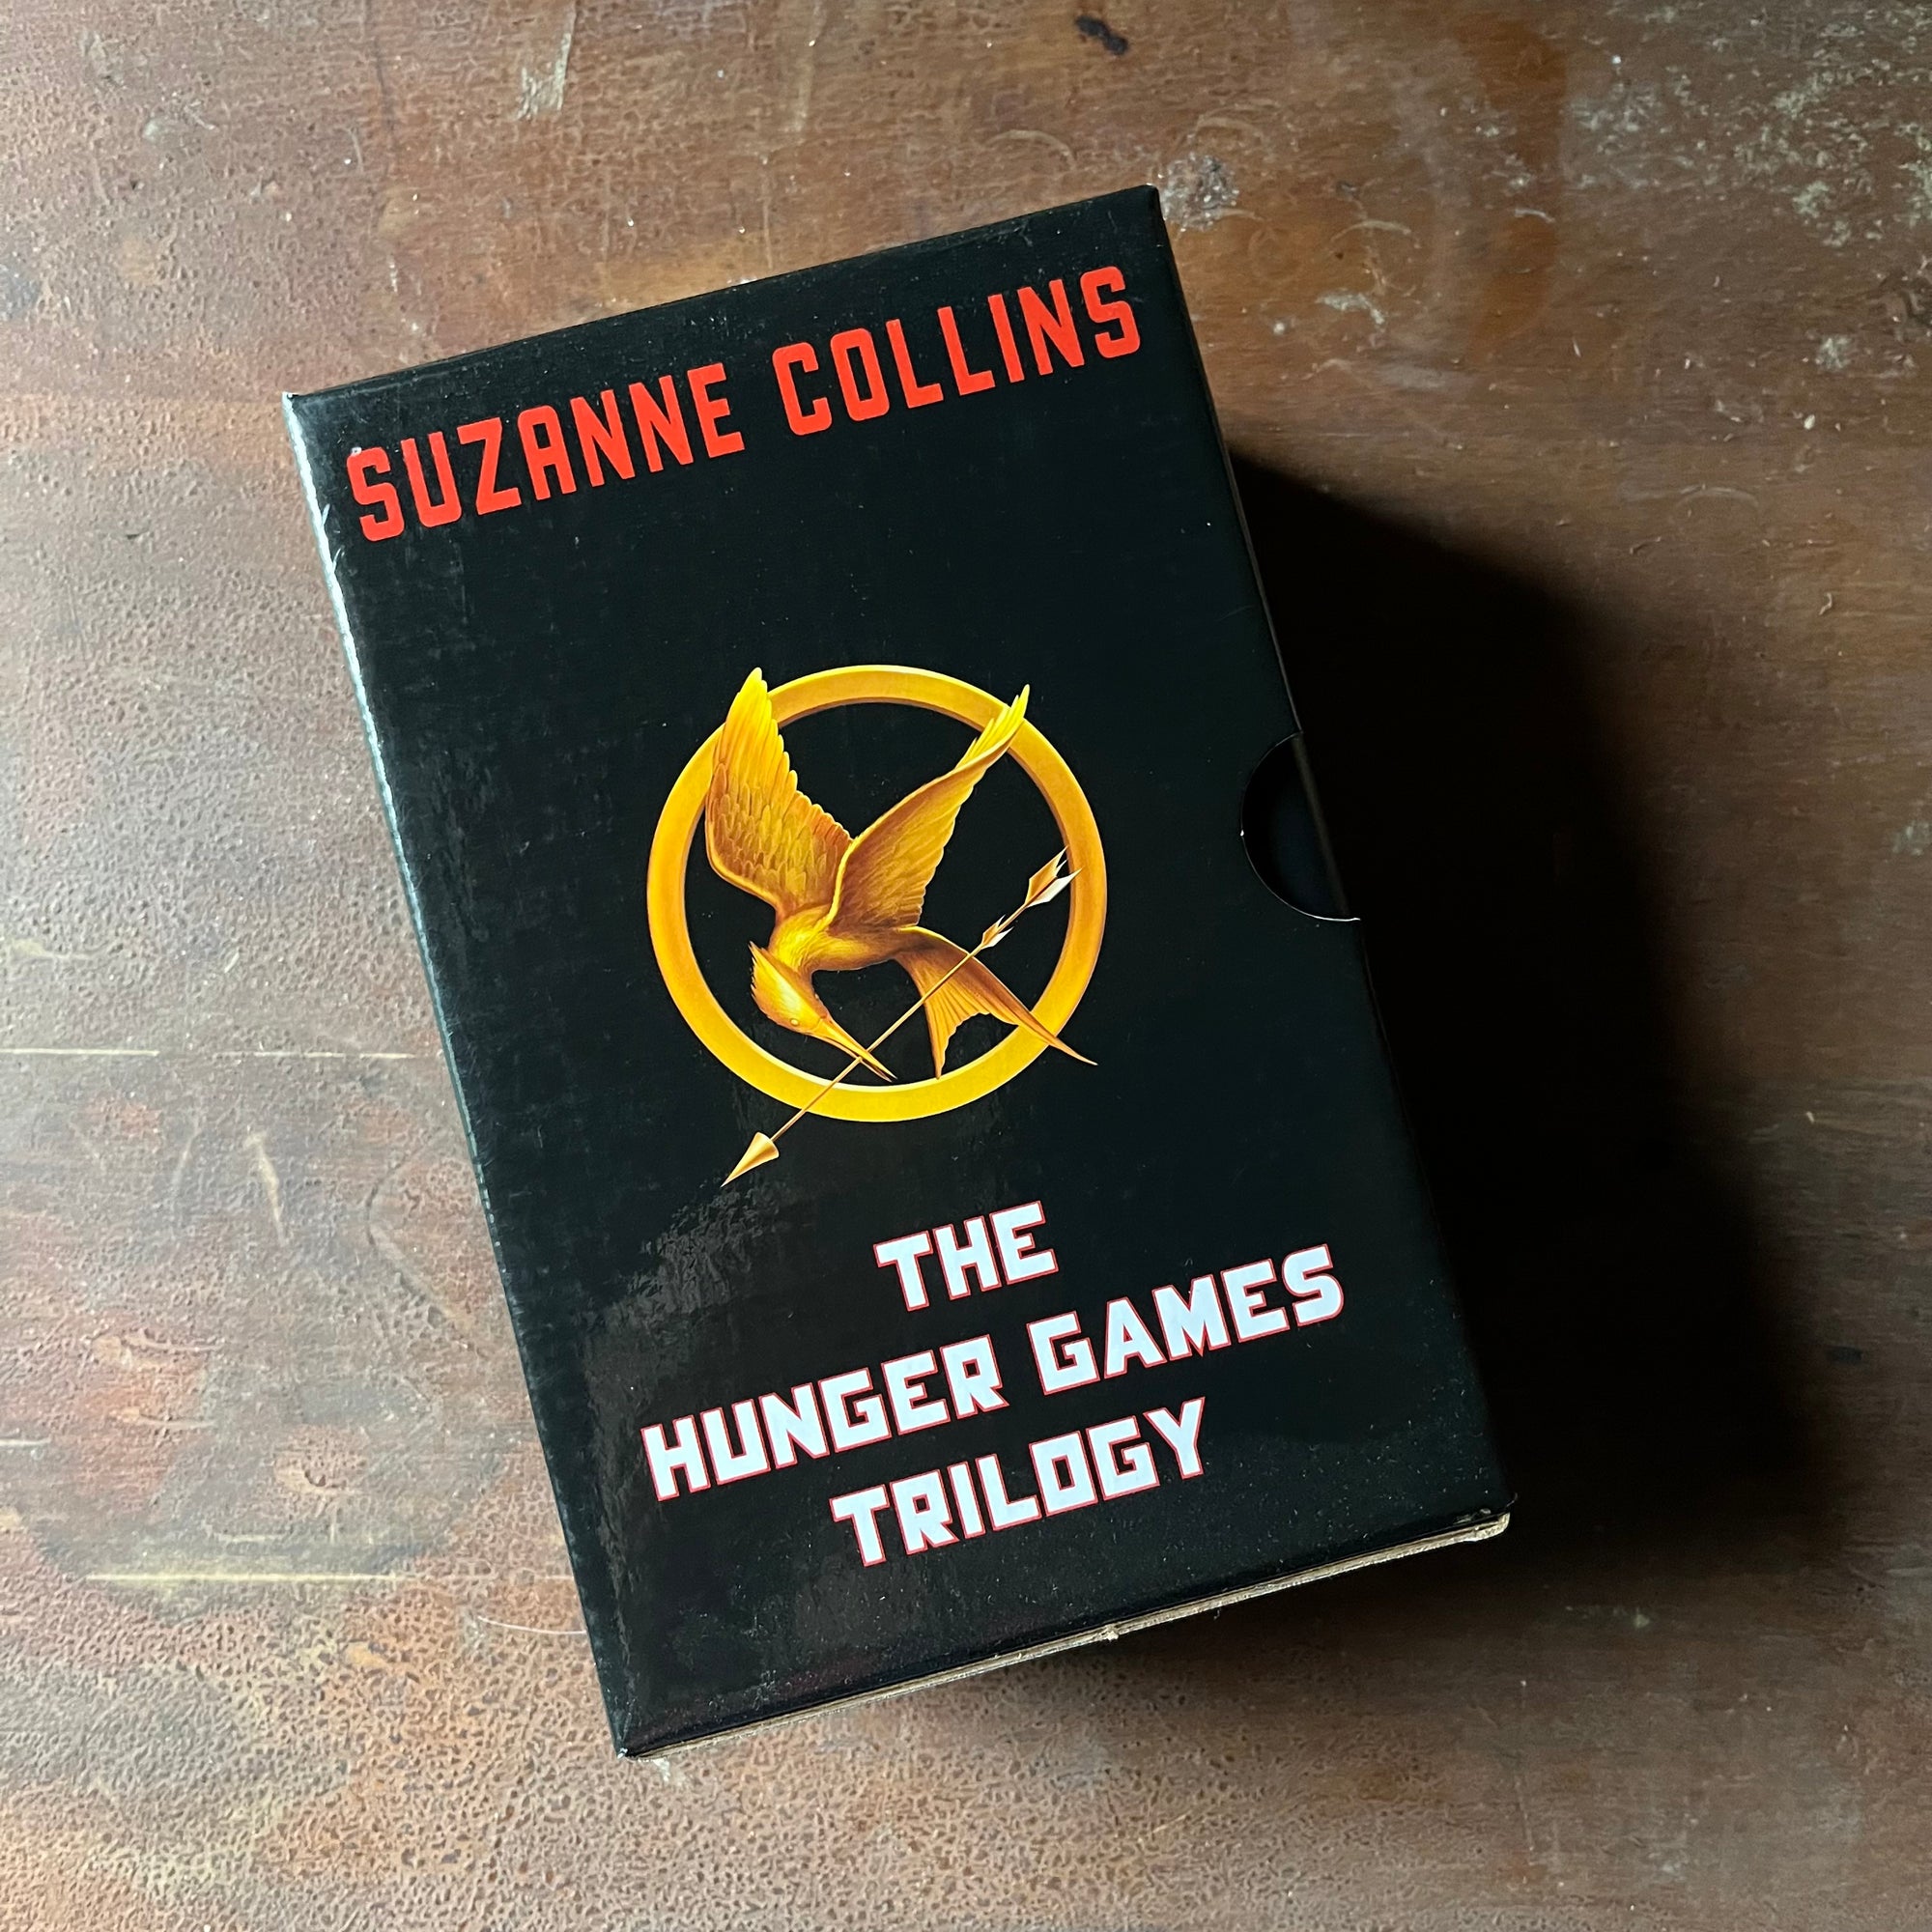 Hunger Games Trilogy Box Set by Suzanne Colline - Side view of the box